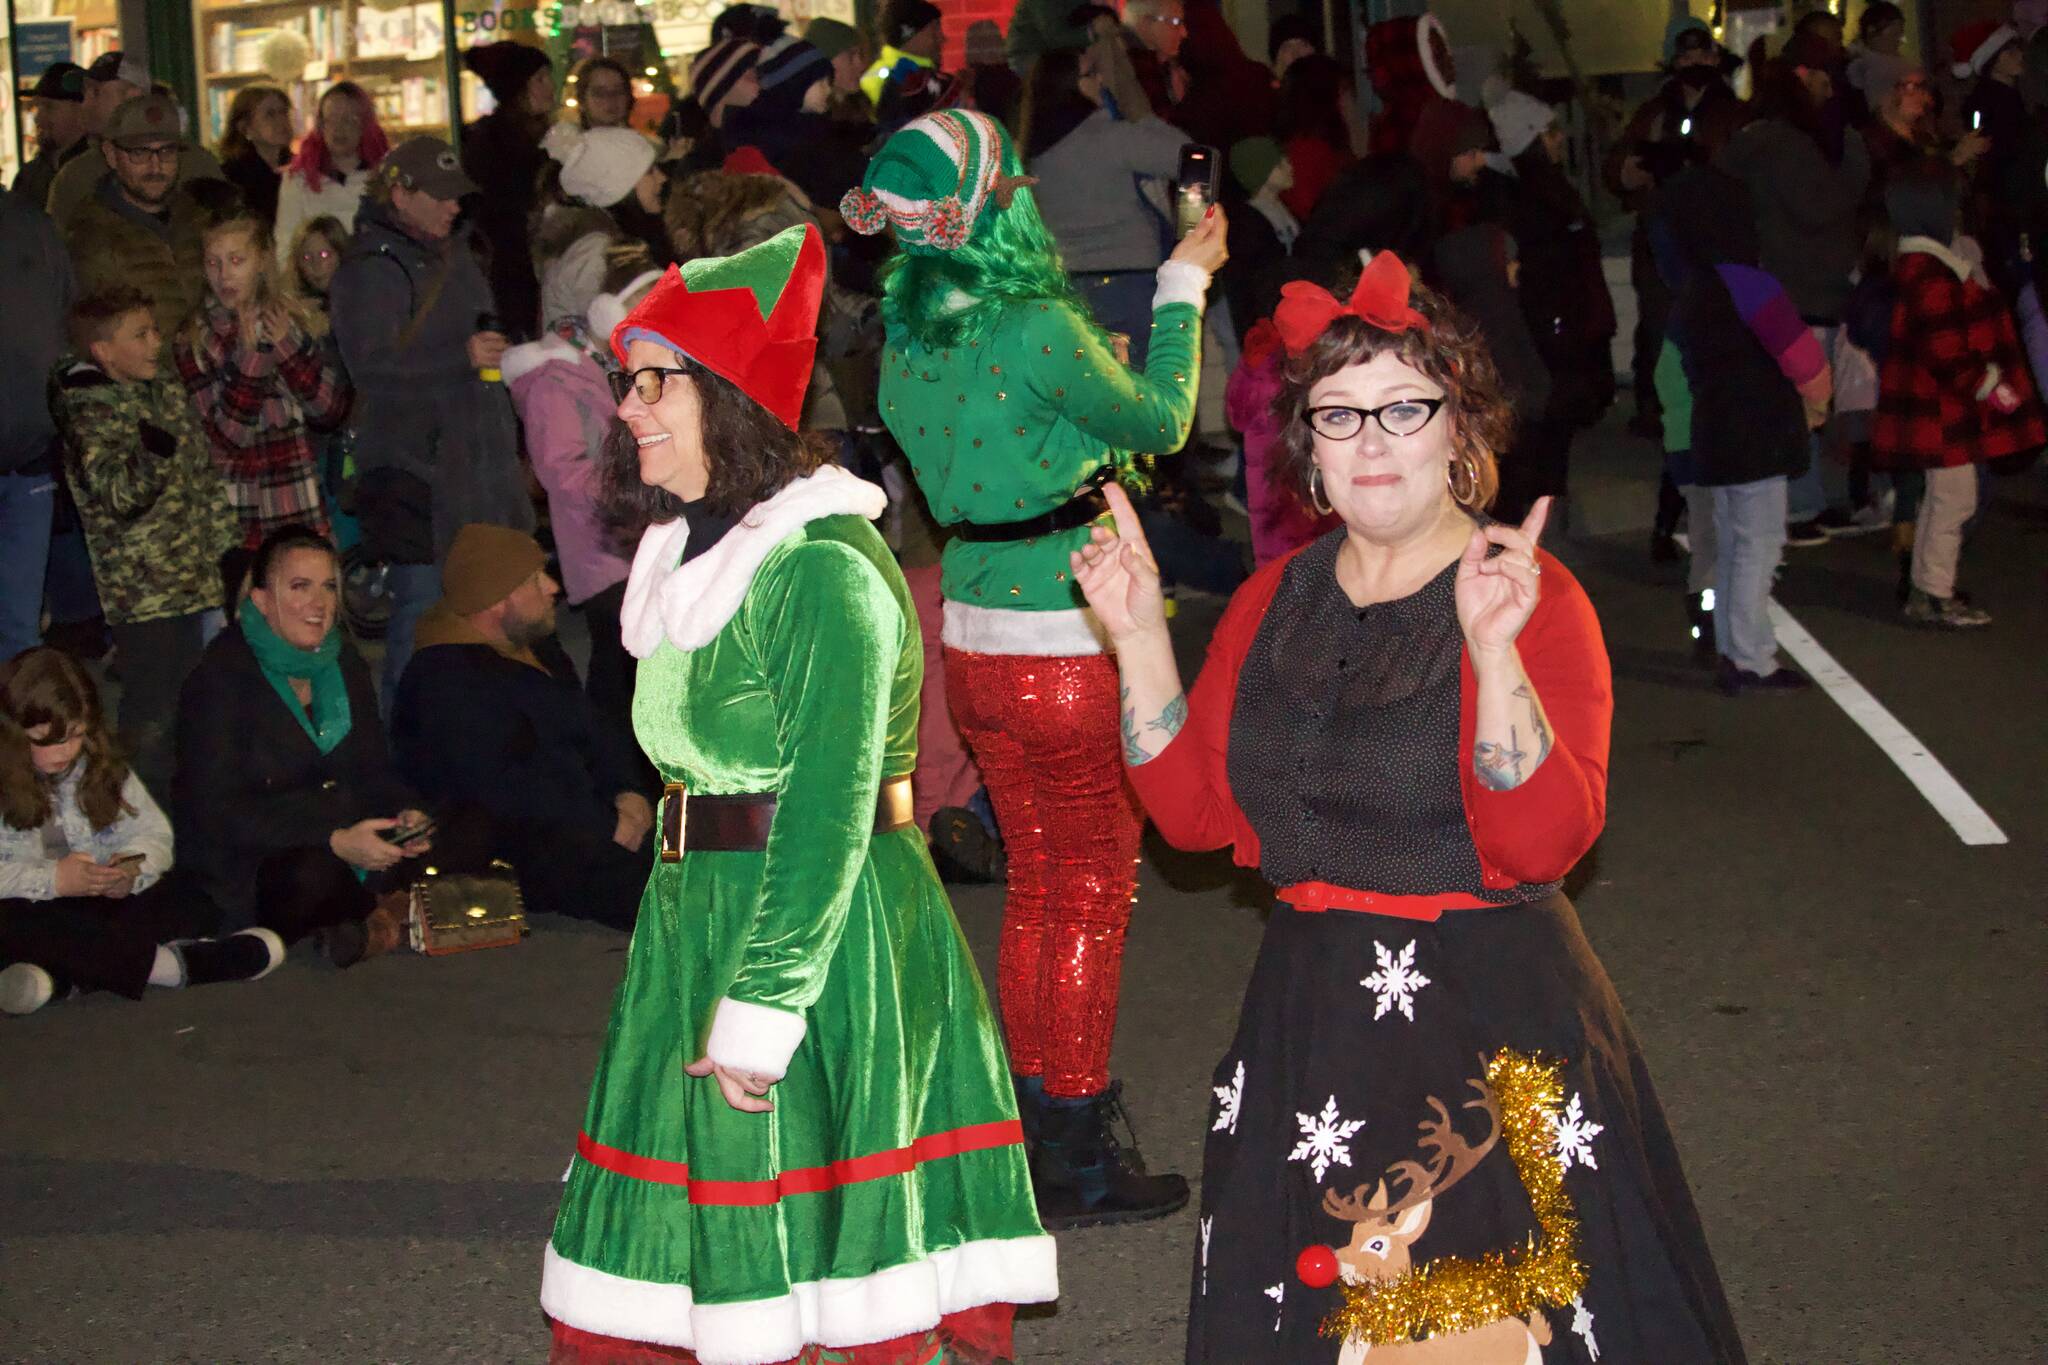 Photo by Rachel Rosen/Whidbey News-Times
Two elves precede Santa and Mrs. Claus during Oak Harbor’s Christmas parade.